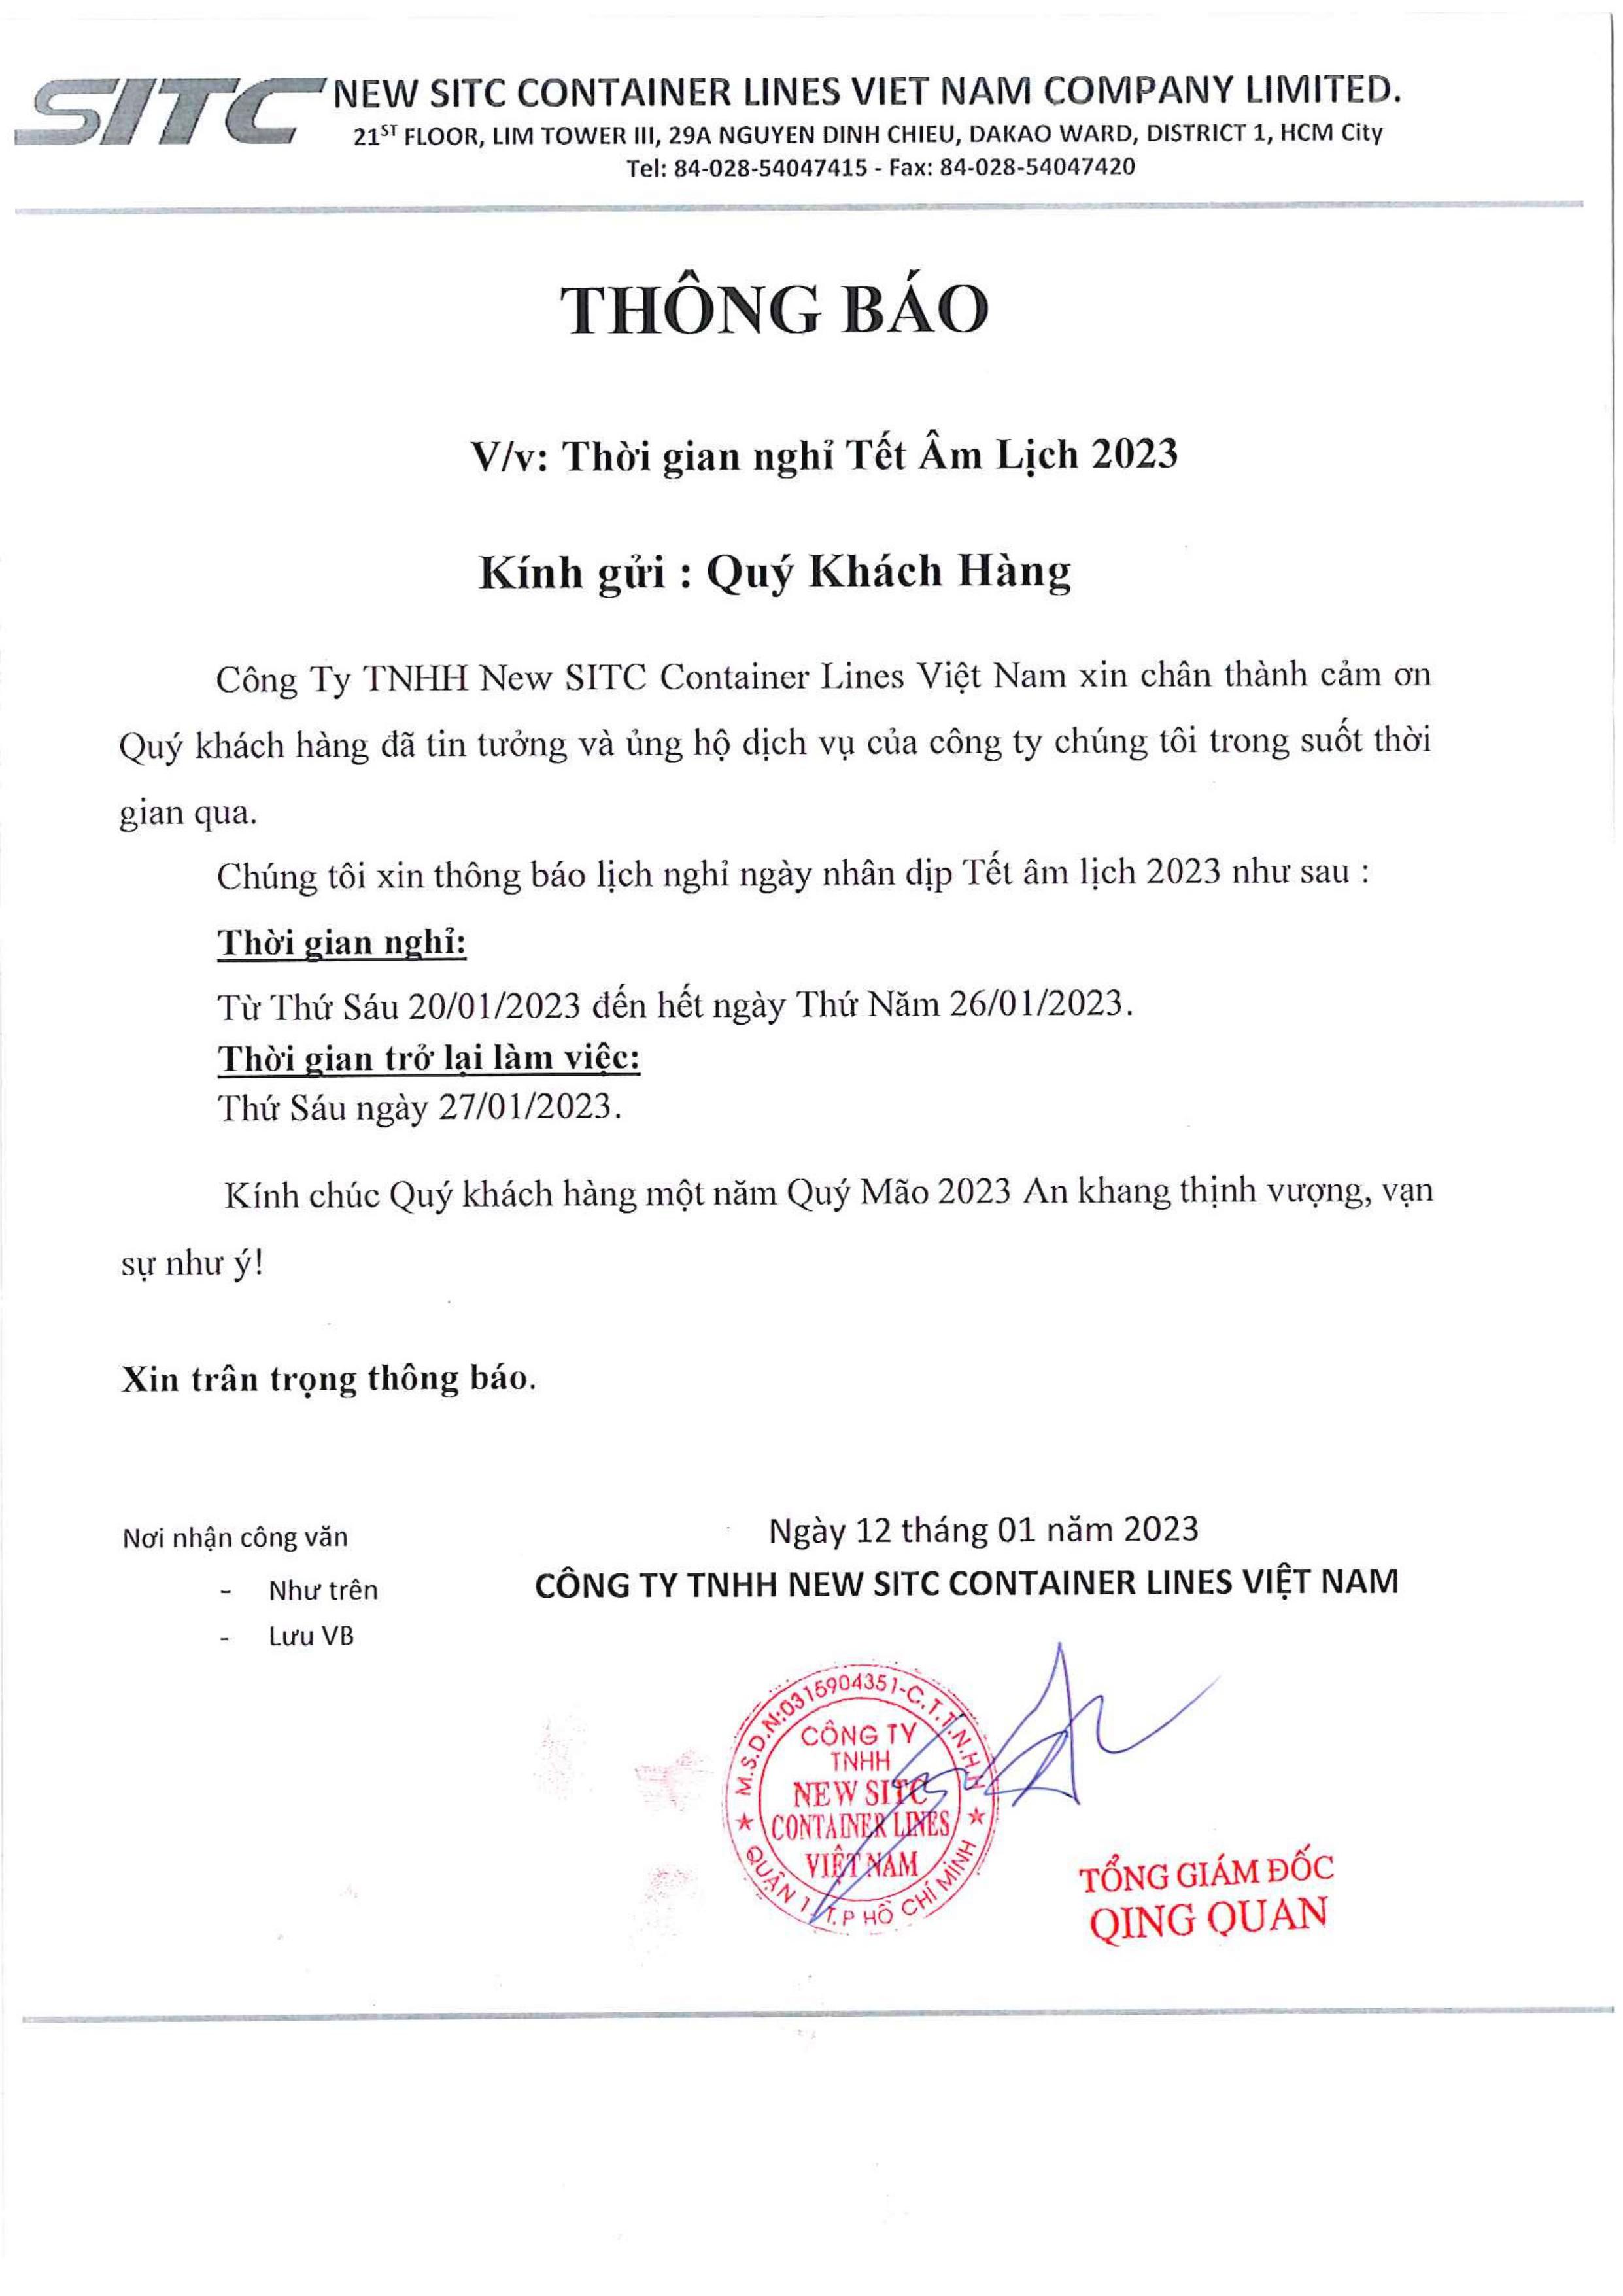 Notice of Lunar New Year holiday 2023